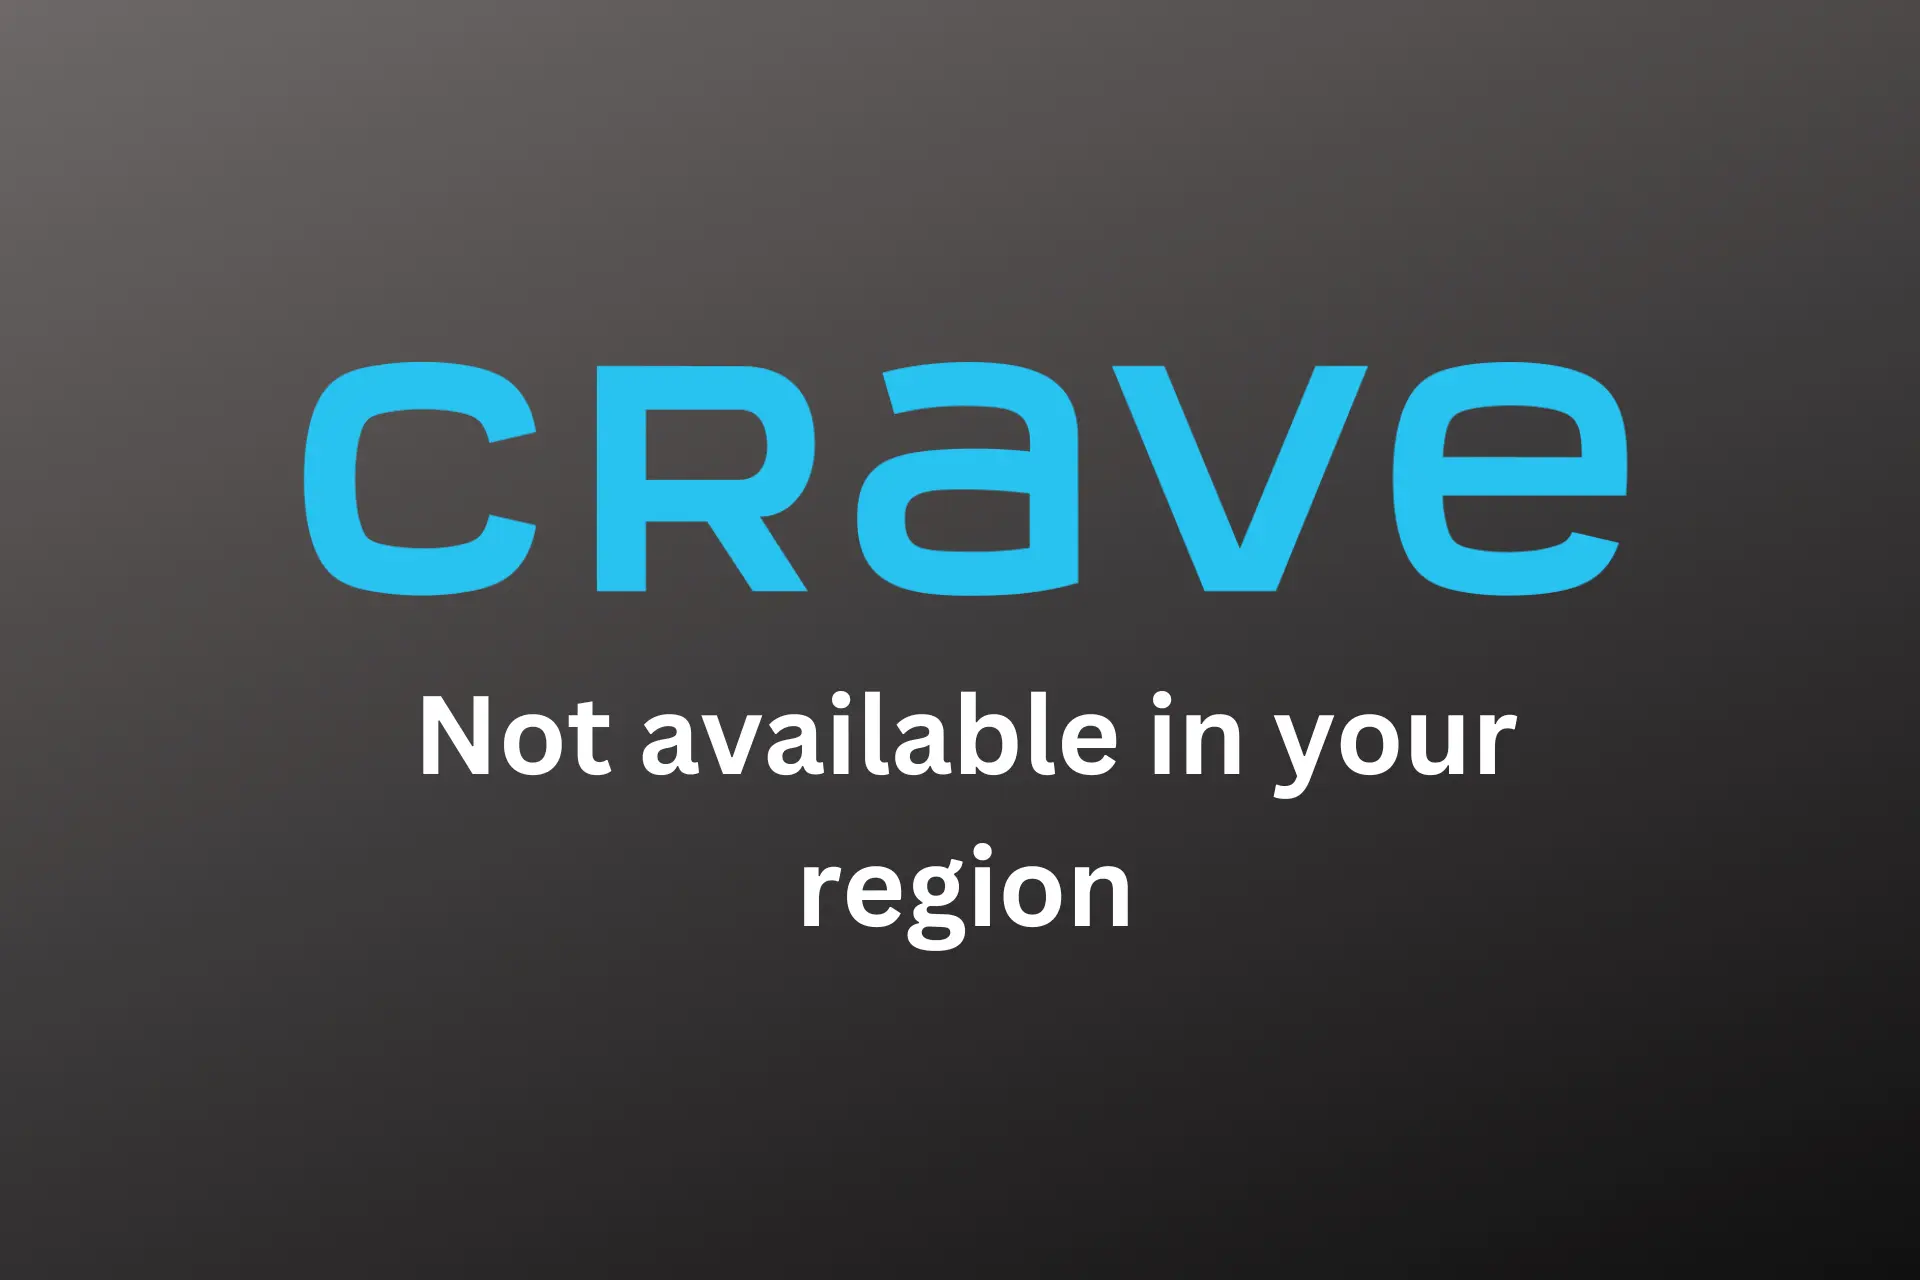 crave not available in your region